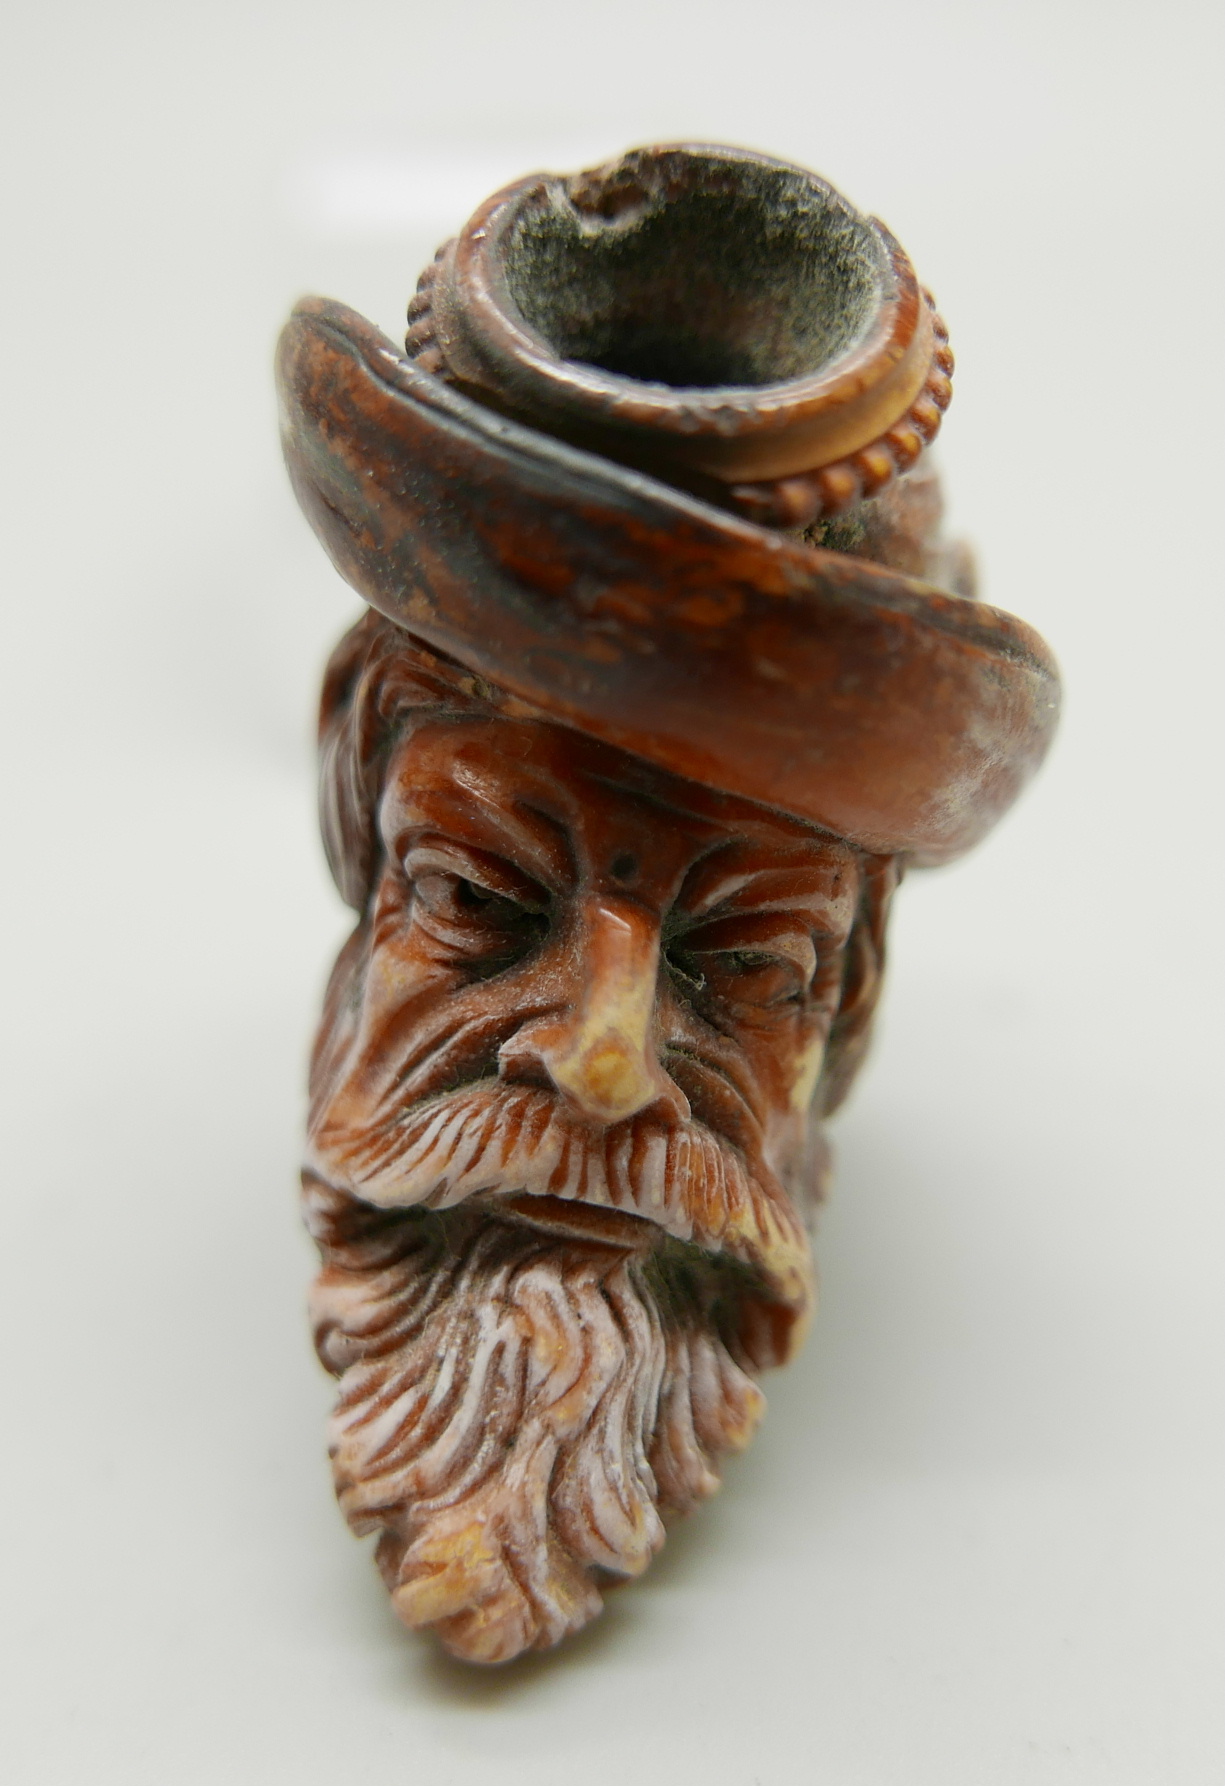 A 19th Century Meerschaum pipe with amber stem, Bavarian man with beard and hat with feather - Image 2 of 5